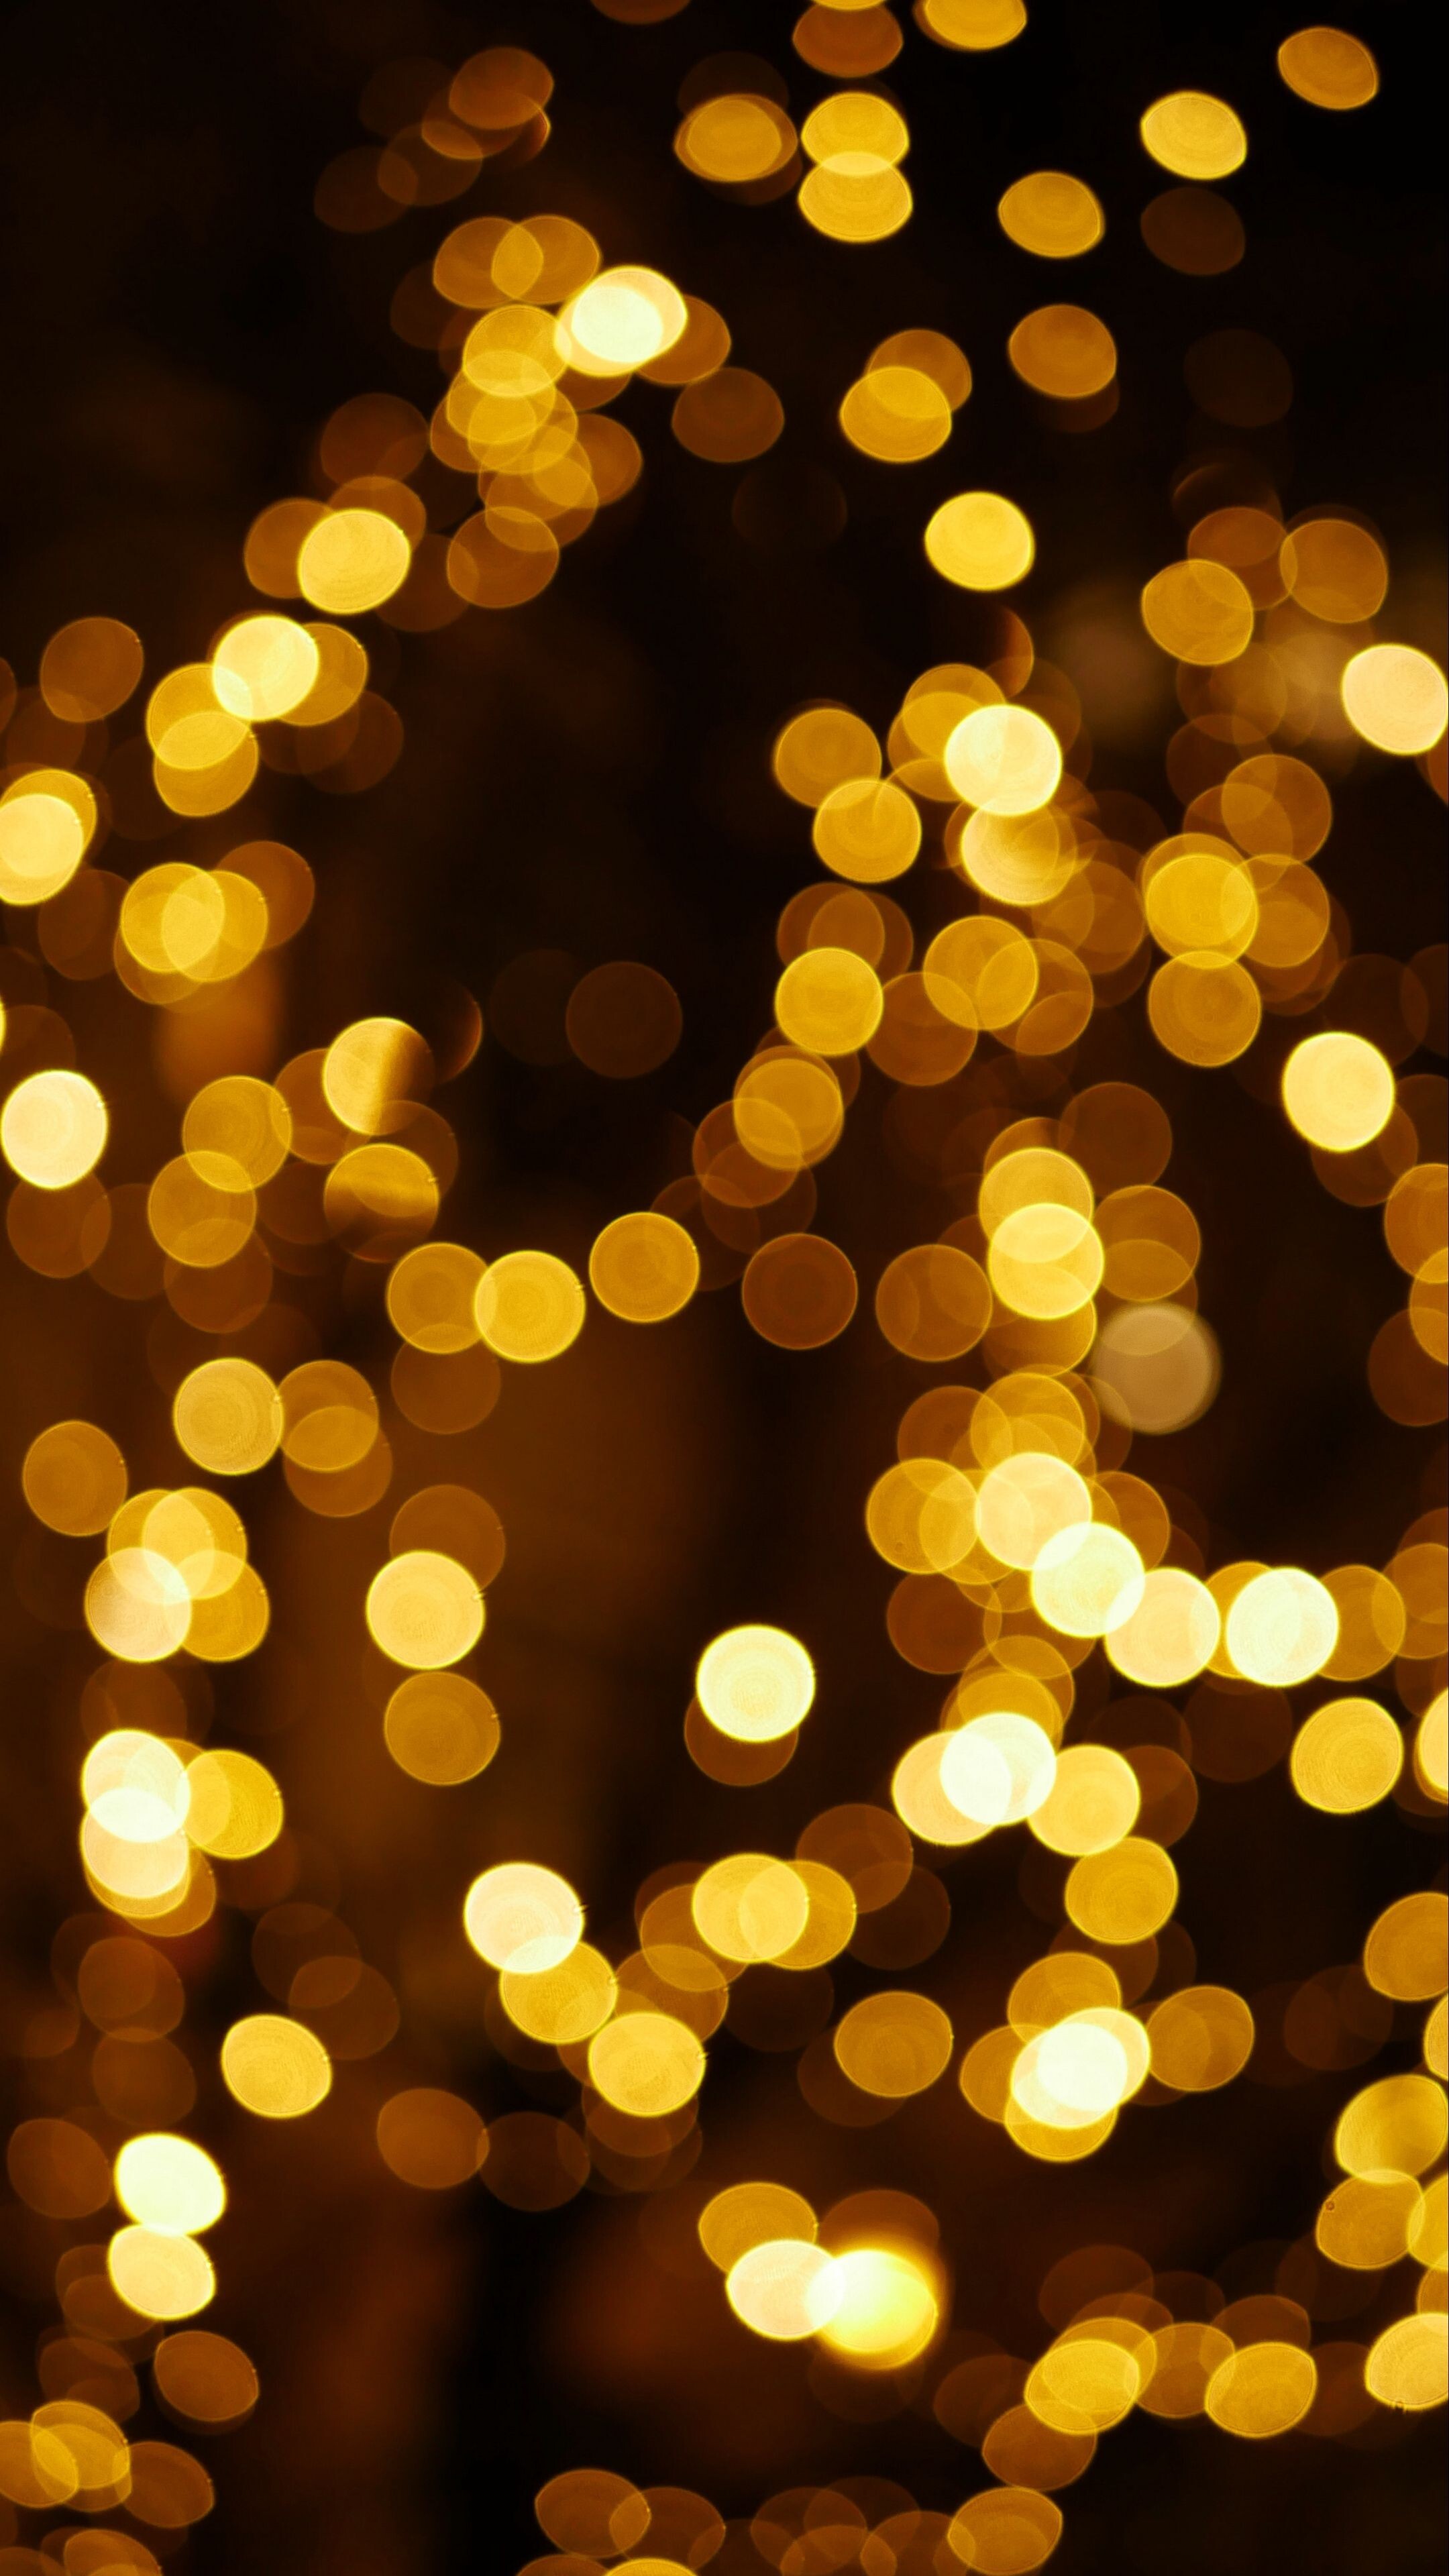 Gold Lights: Light shining through the blurred frosted window glass, Bokeh effect, Sparkling golden bubbles. 2160x3840 4K Background.